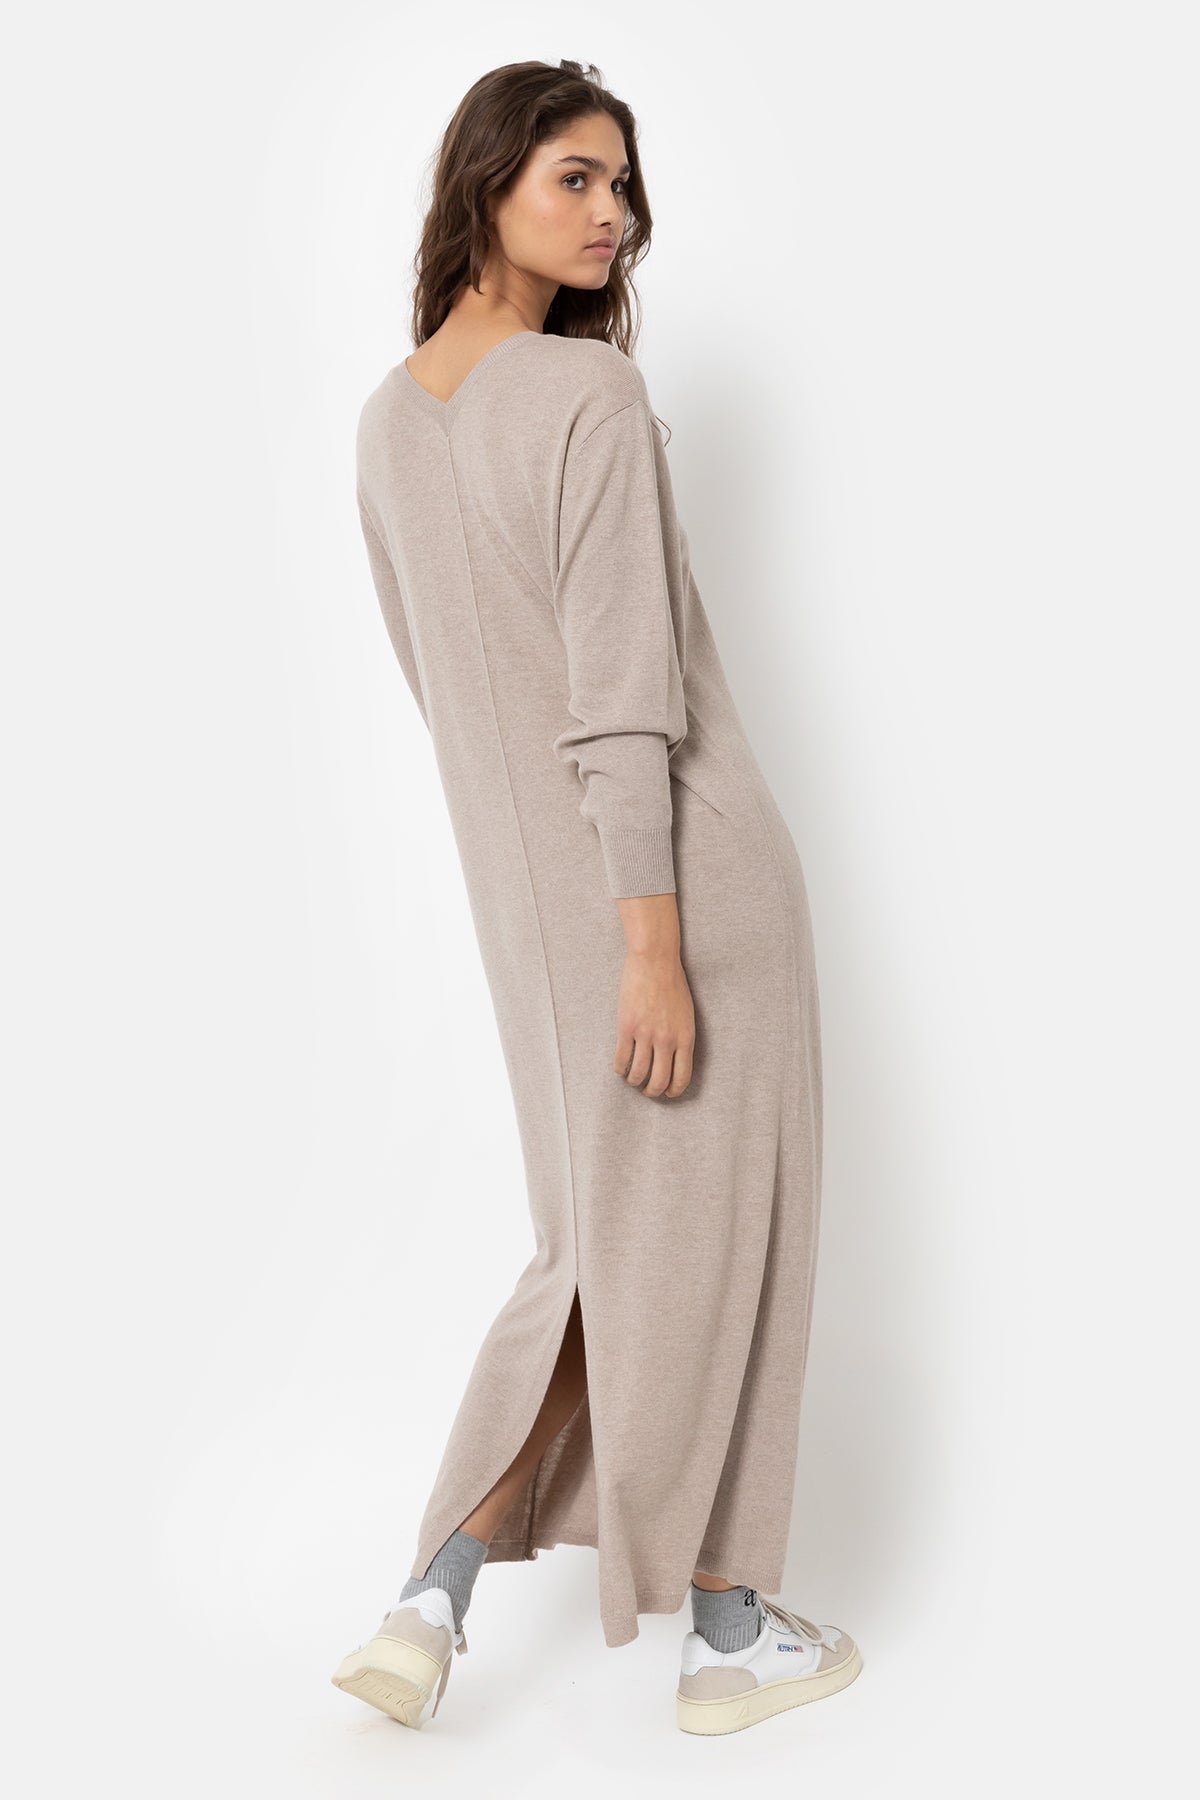 Inka Long Knitted Dress with V-Back | Biscuit